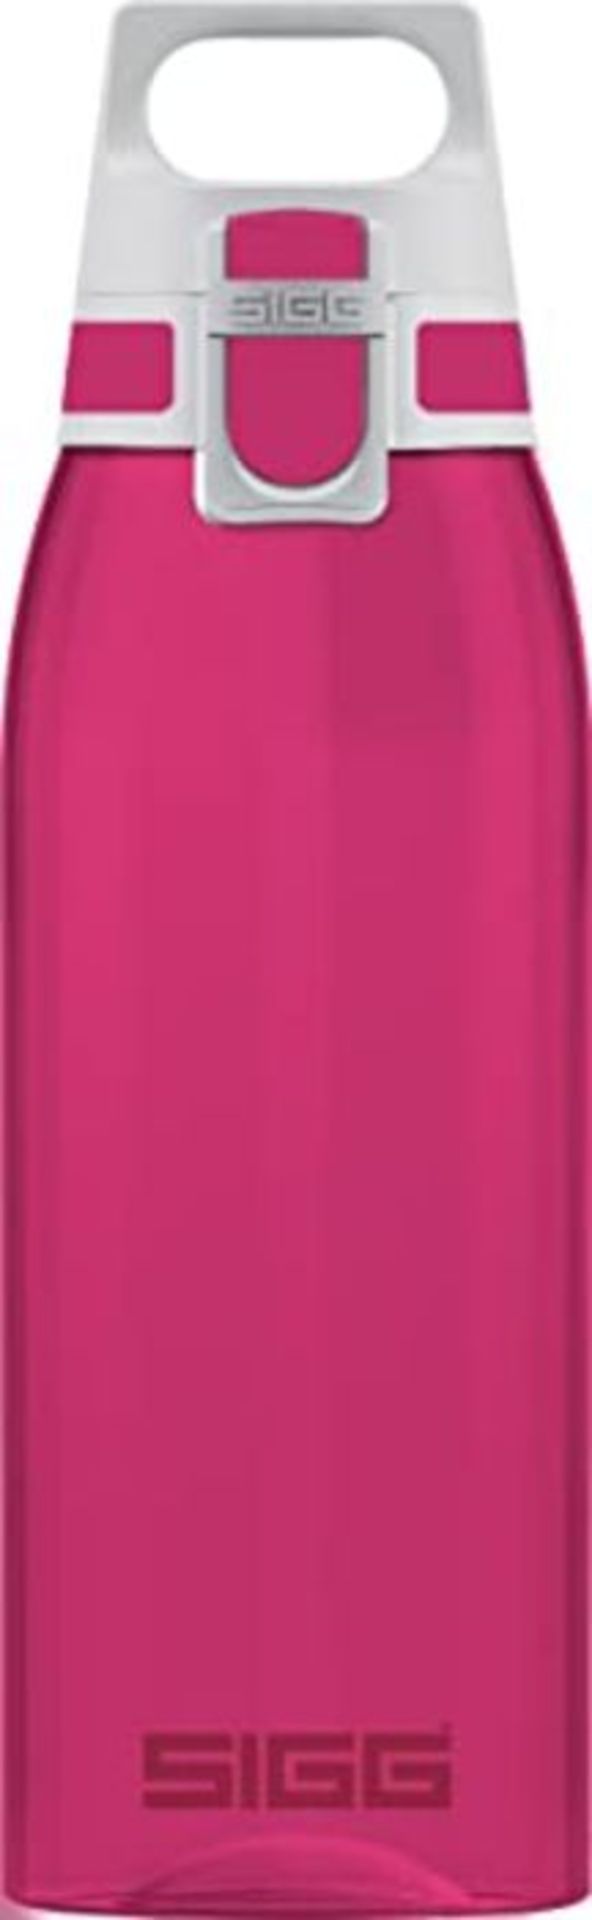 SIGG Total Colour Berry Water Bottle (1 L), BPA-Free Drinks Bottle Crafted from Tritan